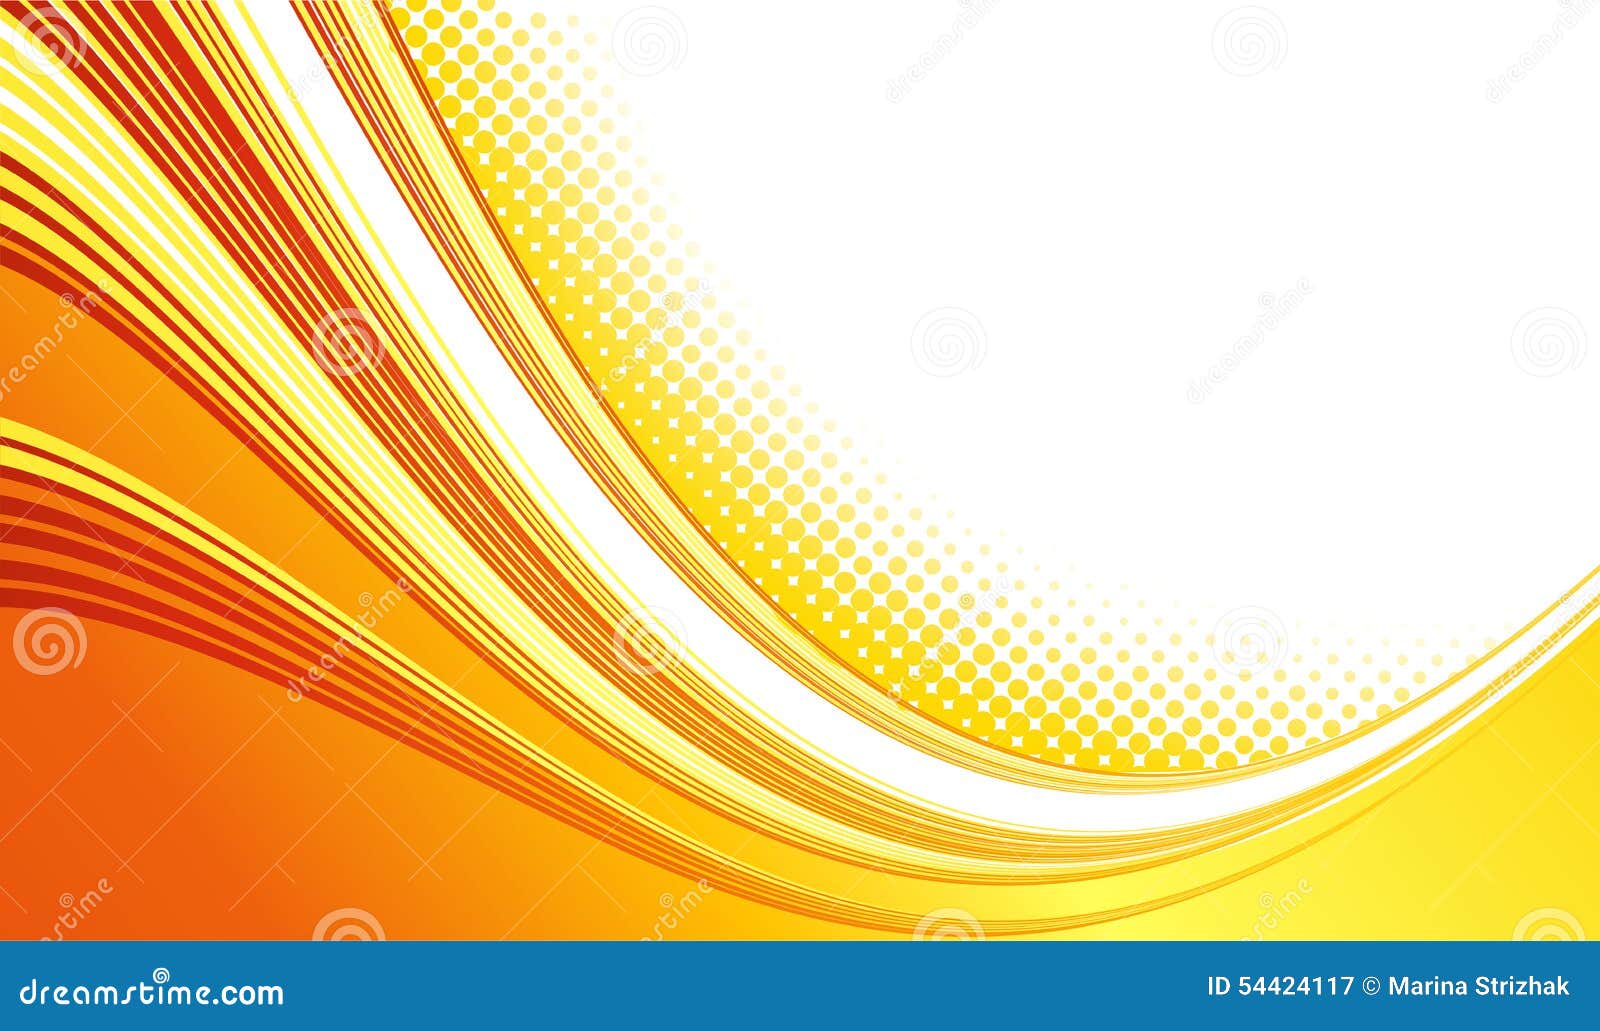 Abstract Curved Lines Background Template Stock Vector Illustration Of Halftone Curve